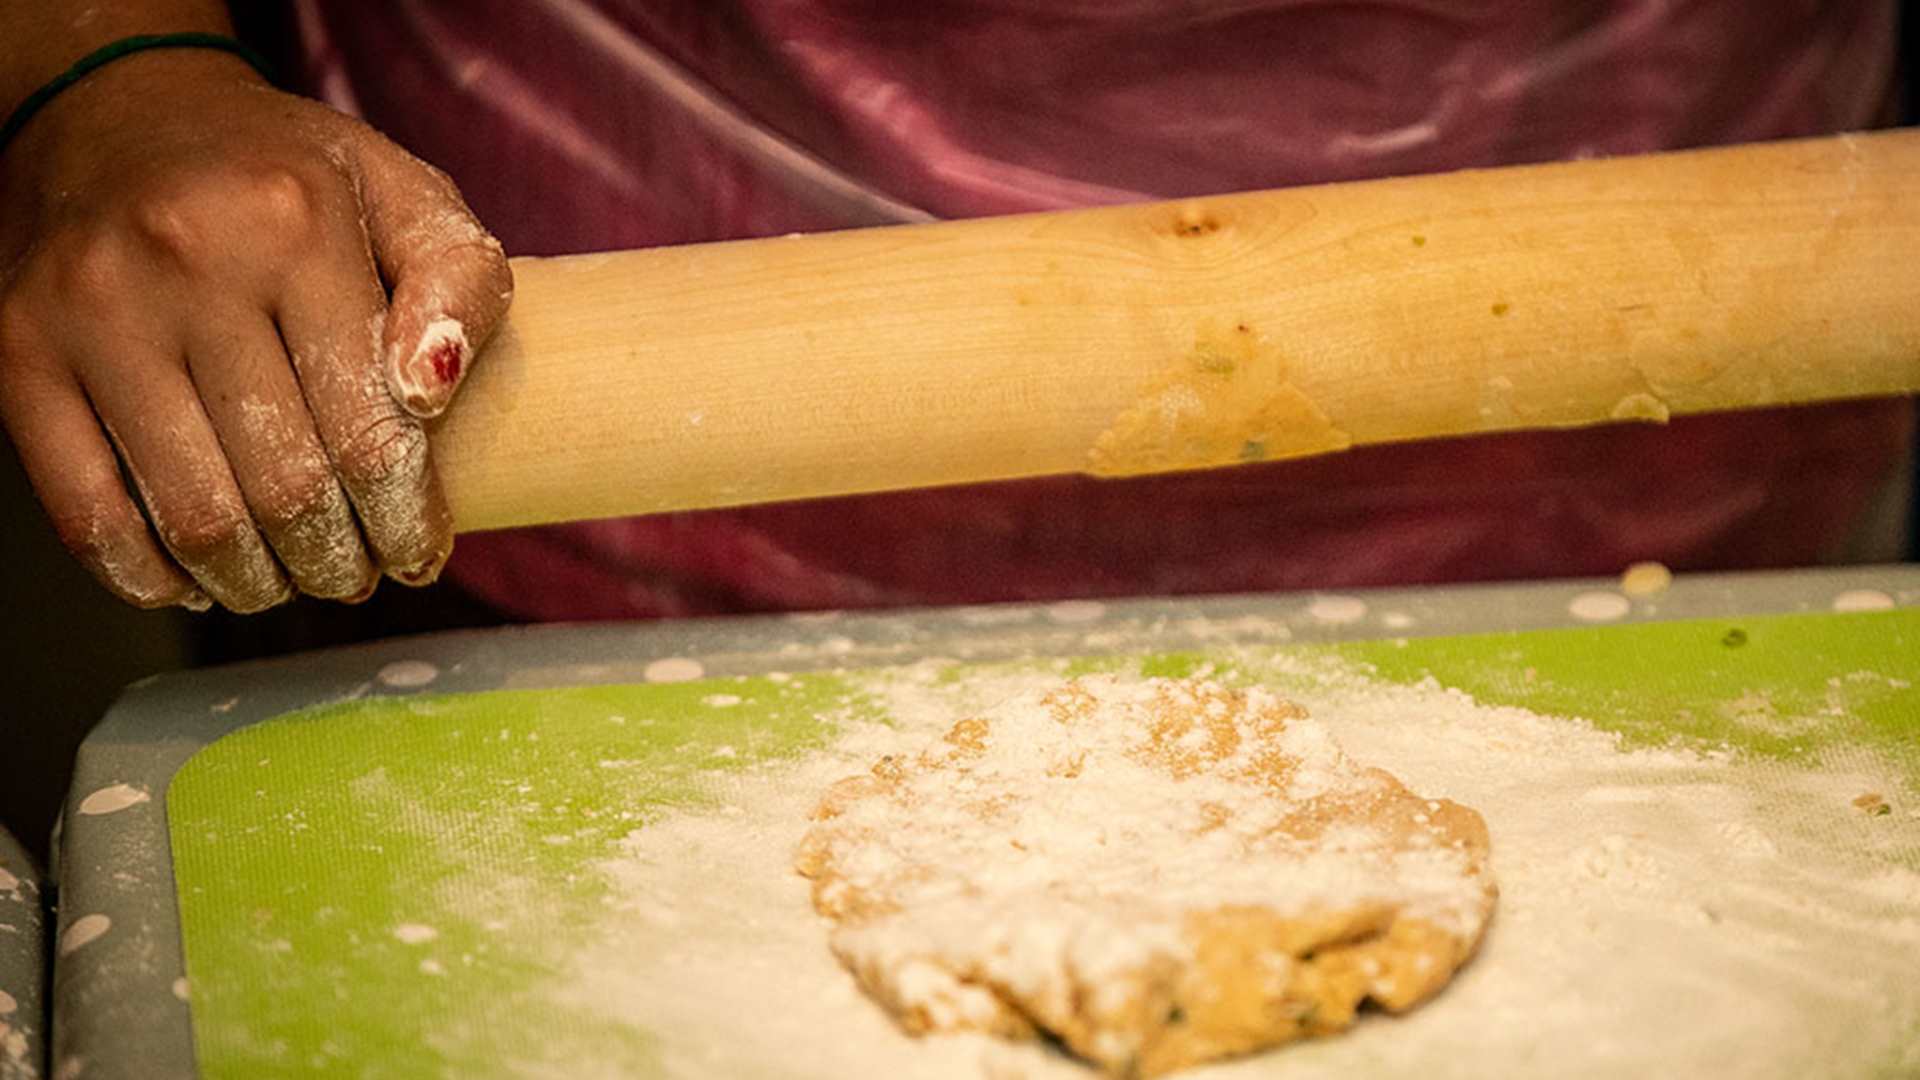 Woman's hands using a rolling pin to roll baked goods